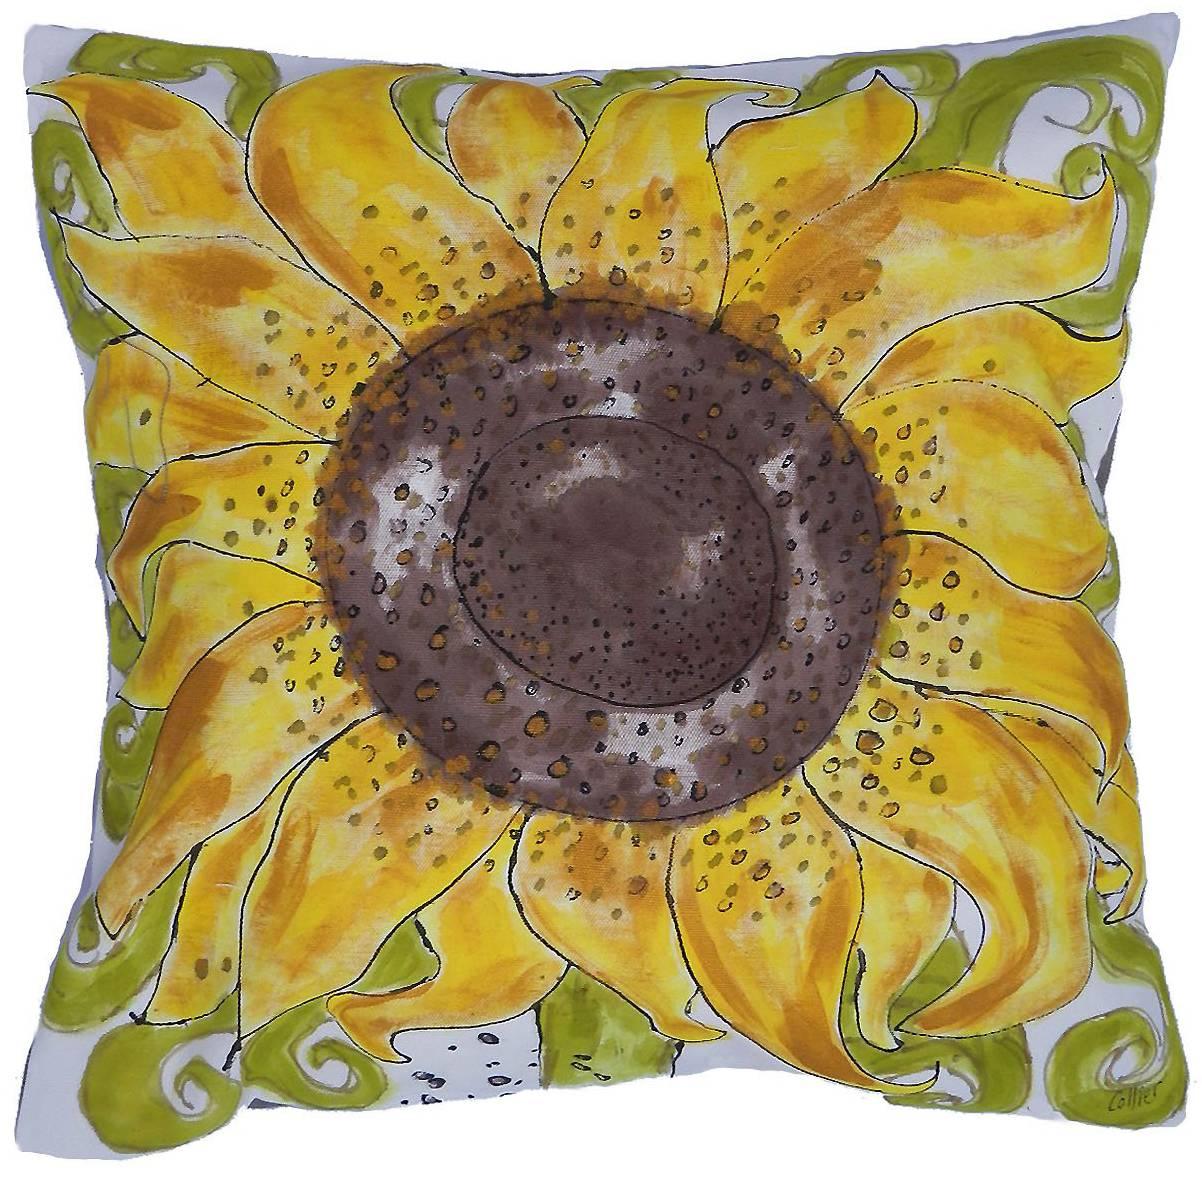 One of a Kind Pillow Hand-Painted Sunflower Unique Throw Cushion Artist Signed